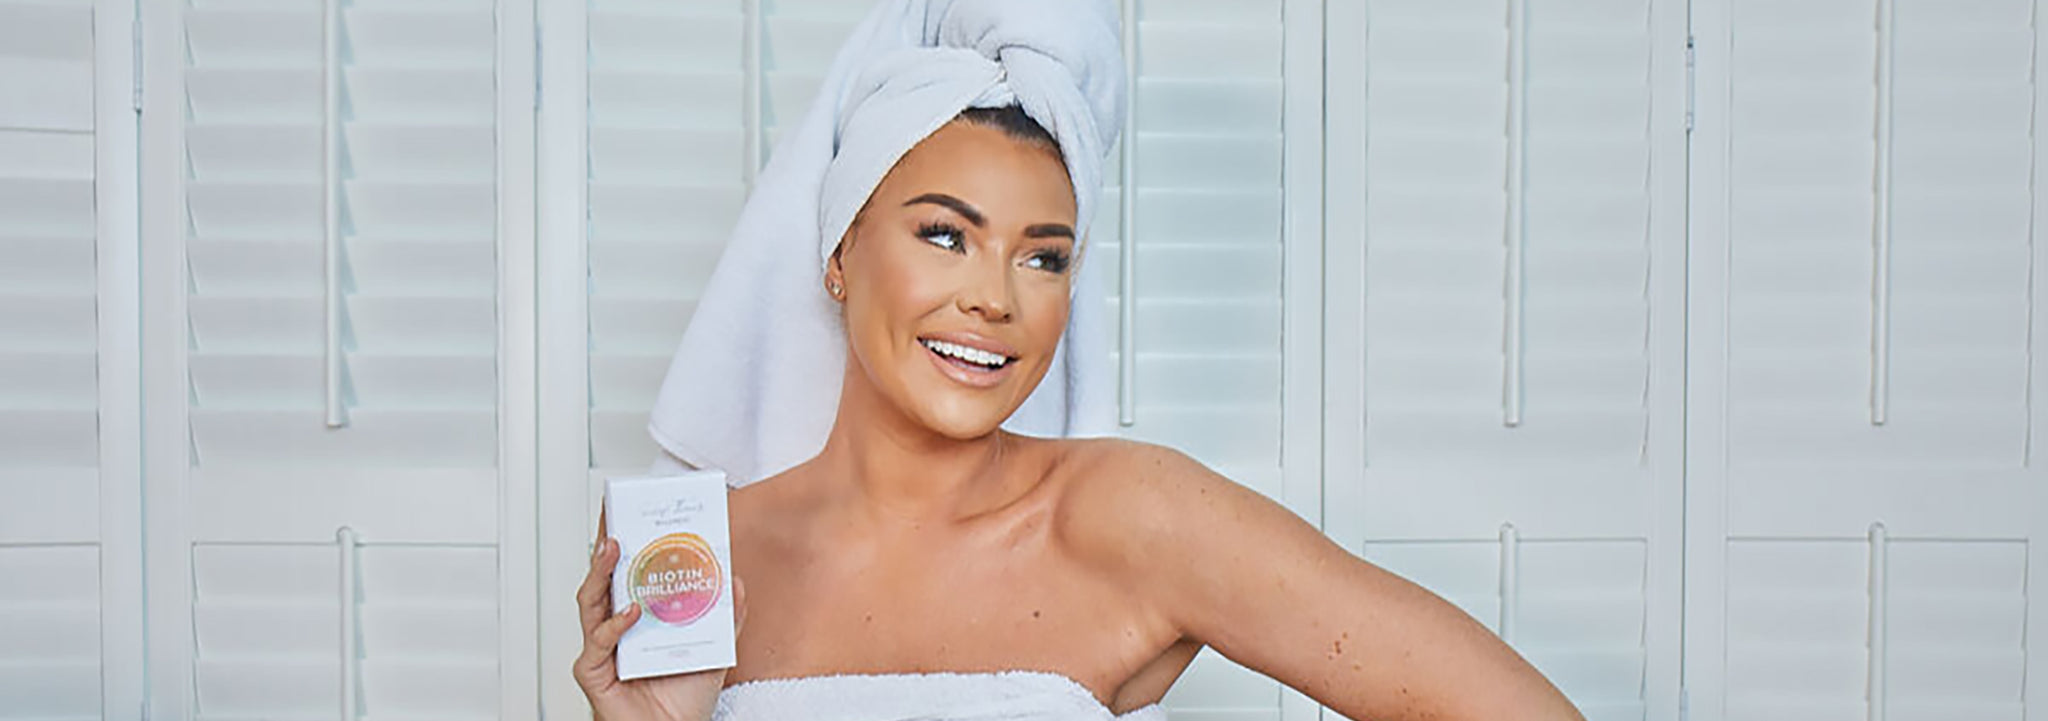 Jessica Wright happy after just using Biotin Brilliance supplements